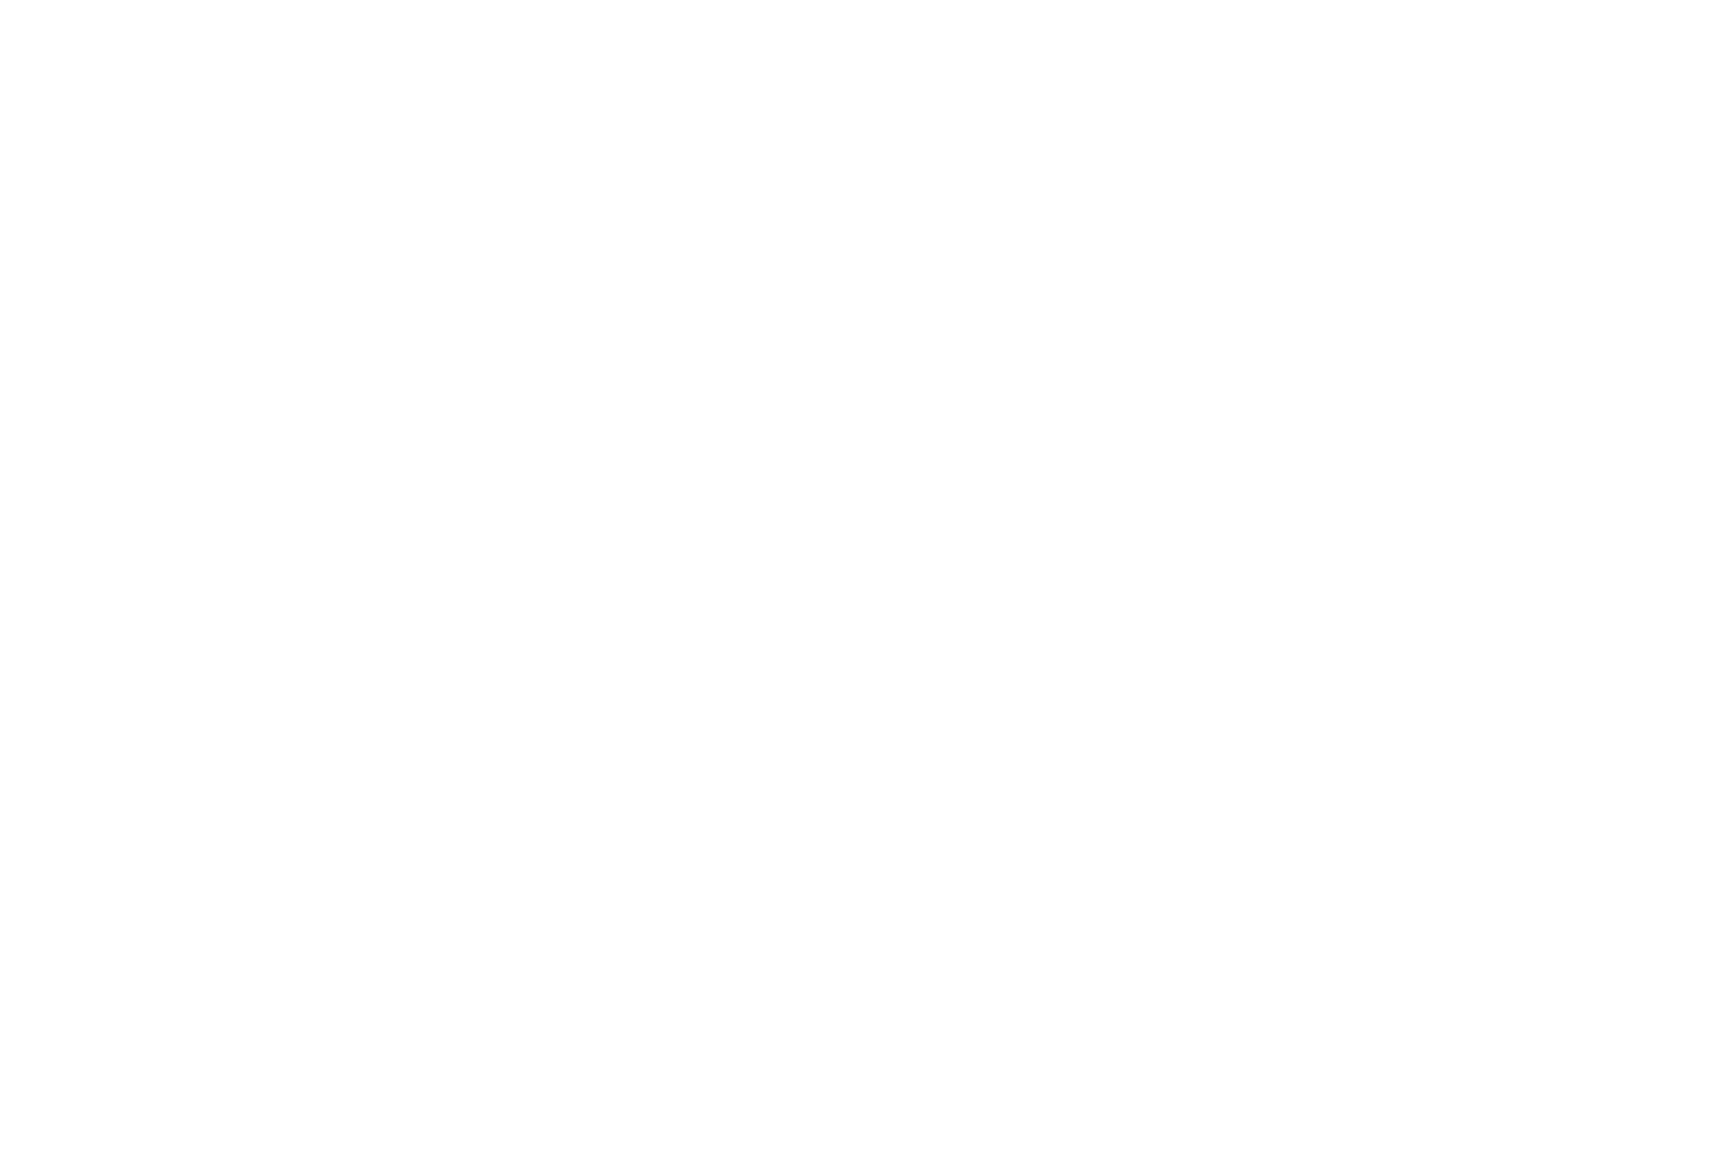 OFFICIAL SELECTION - Kosice International Film Festival - 2021